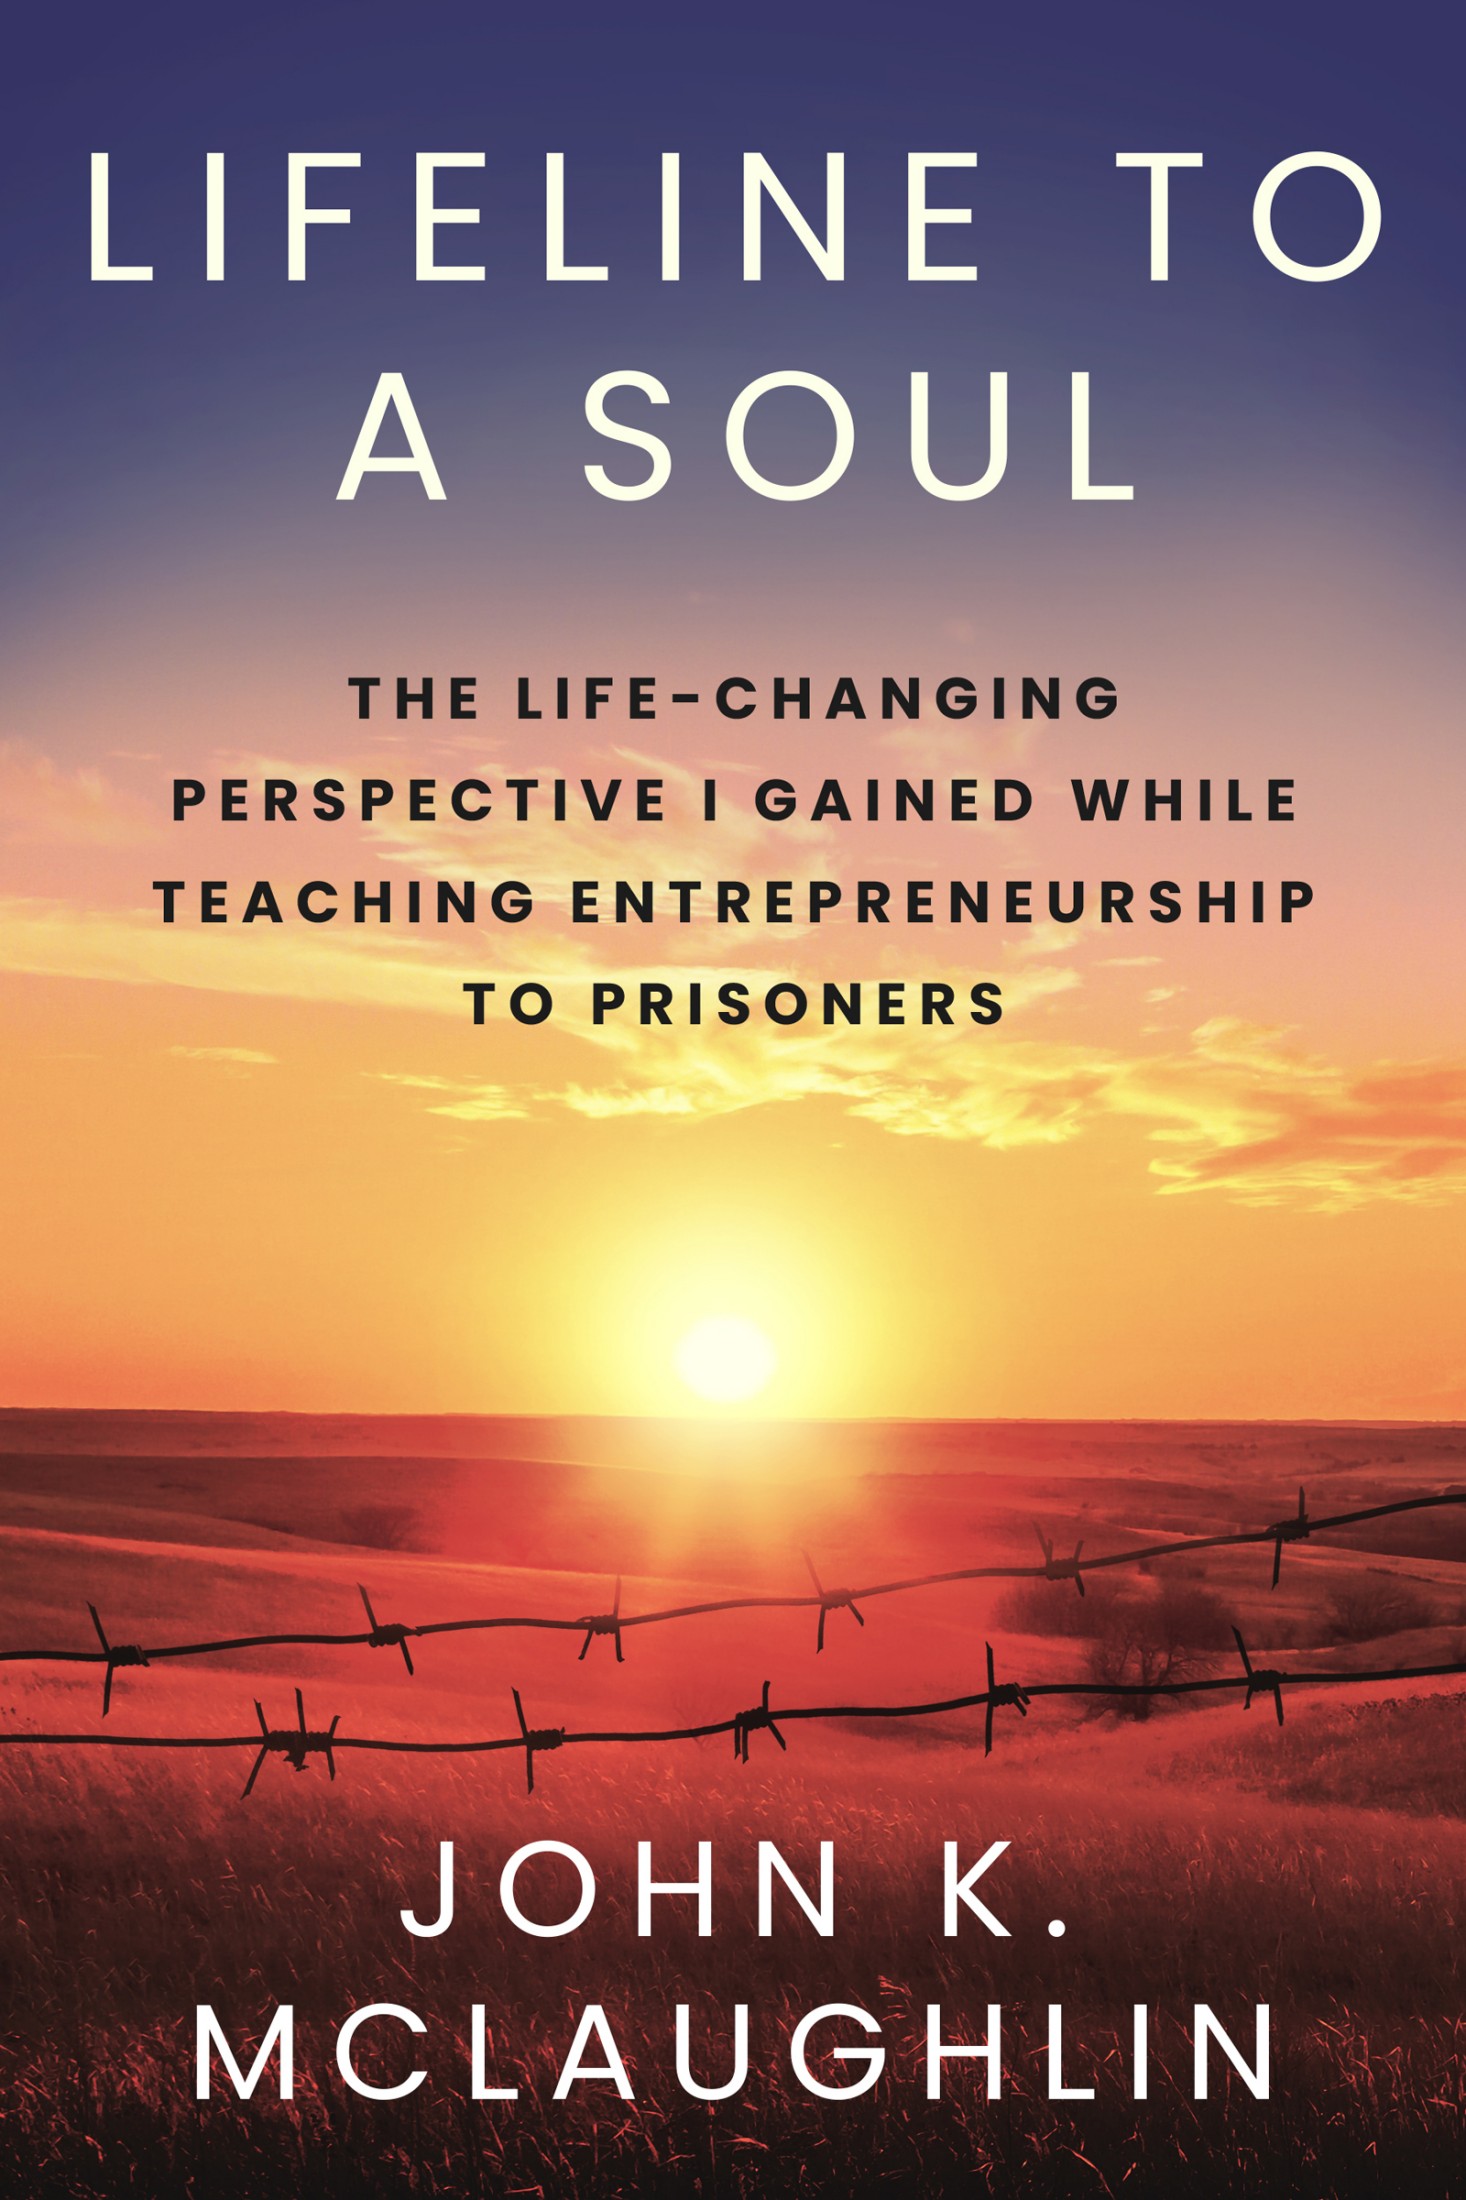 Book cover for "Lifeline to a Soul" by John K. McLaughlin features a sun rising over a vast open landscape, with barbed wire in the foreground.